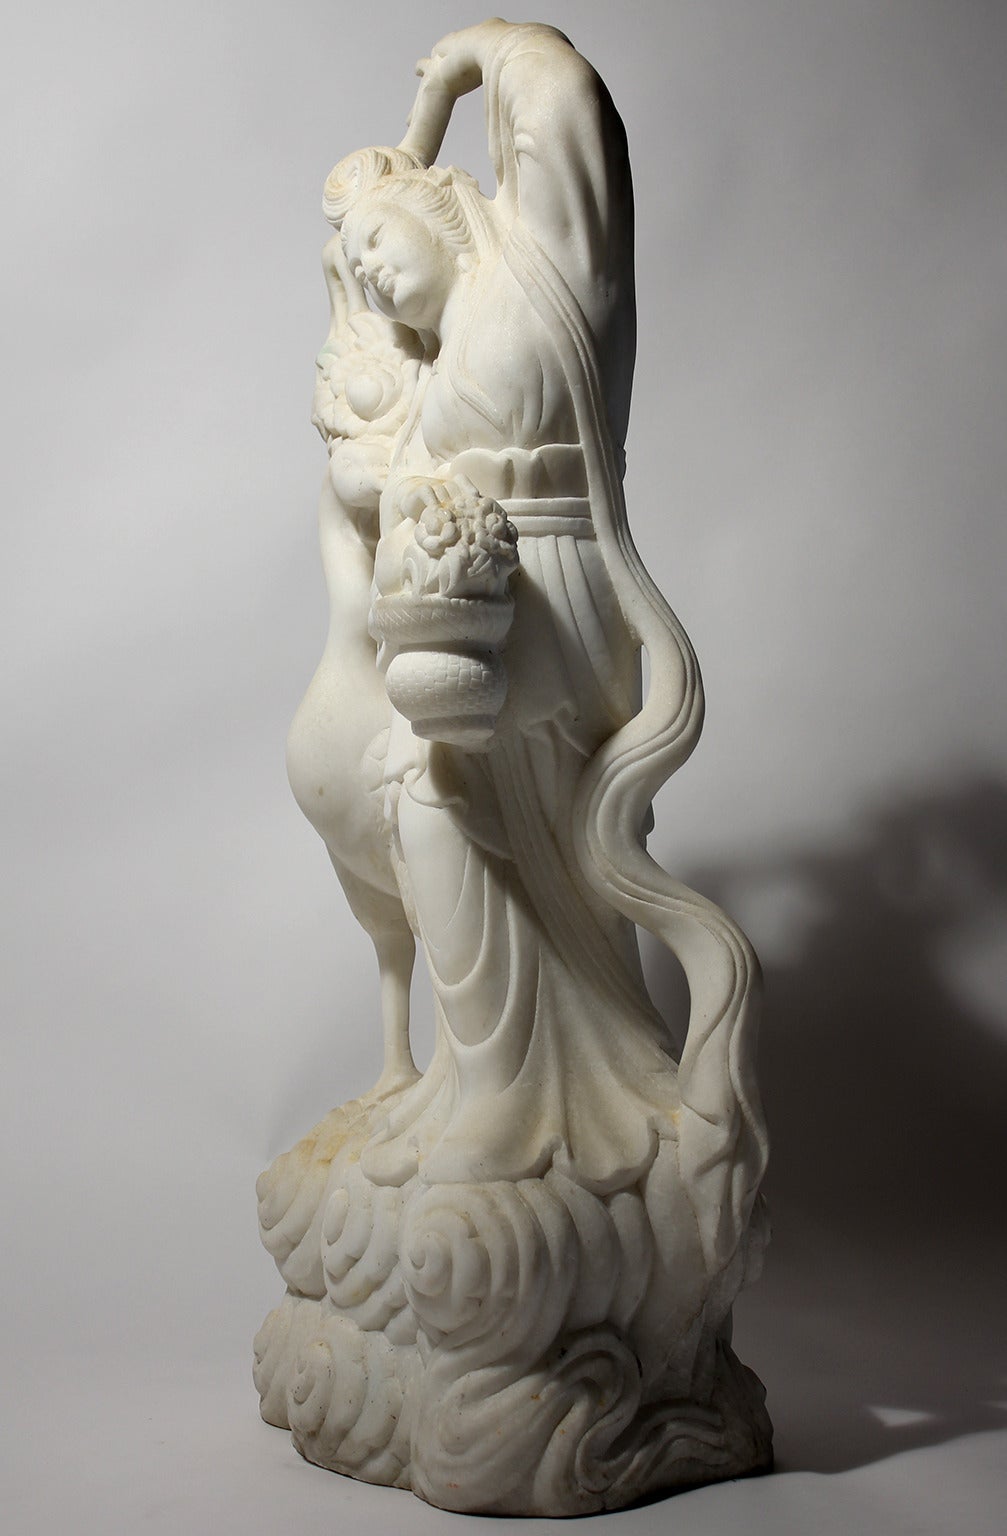 Hand-carved Chinese marble Quan Yin with crane. This sculpture has great detail and patina. Very heavy and in excellent condition.